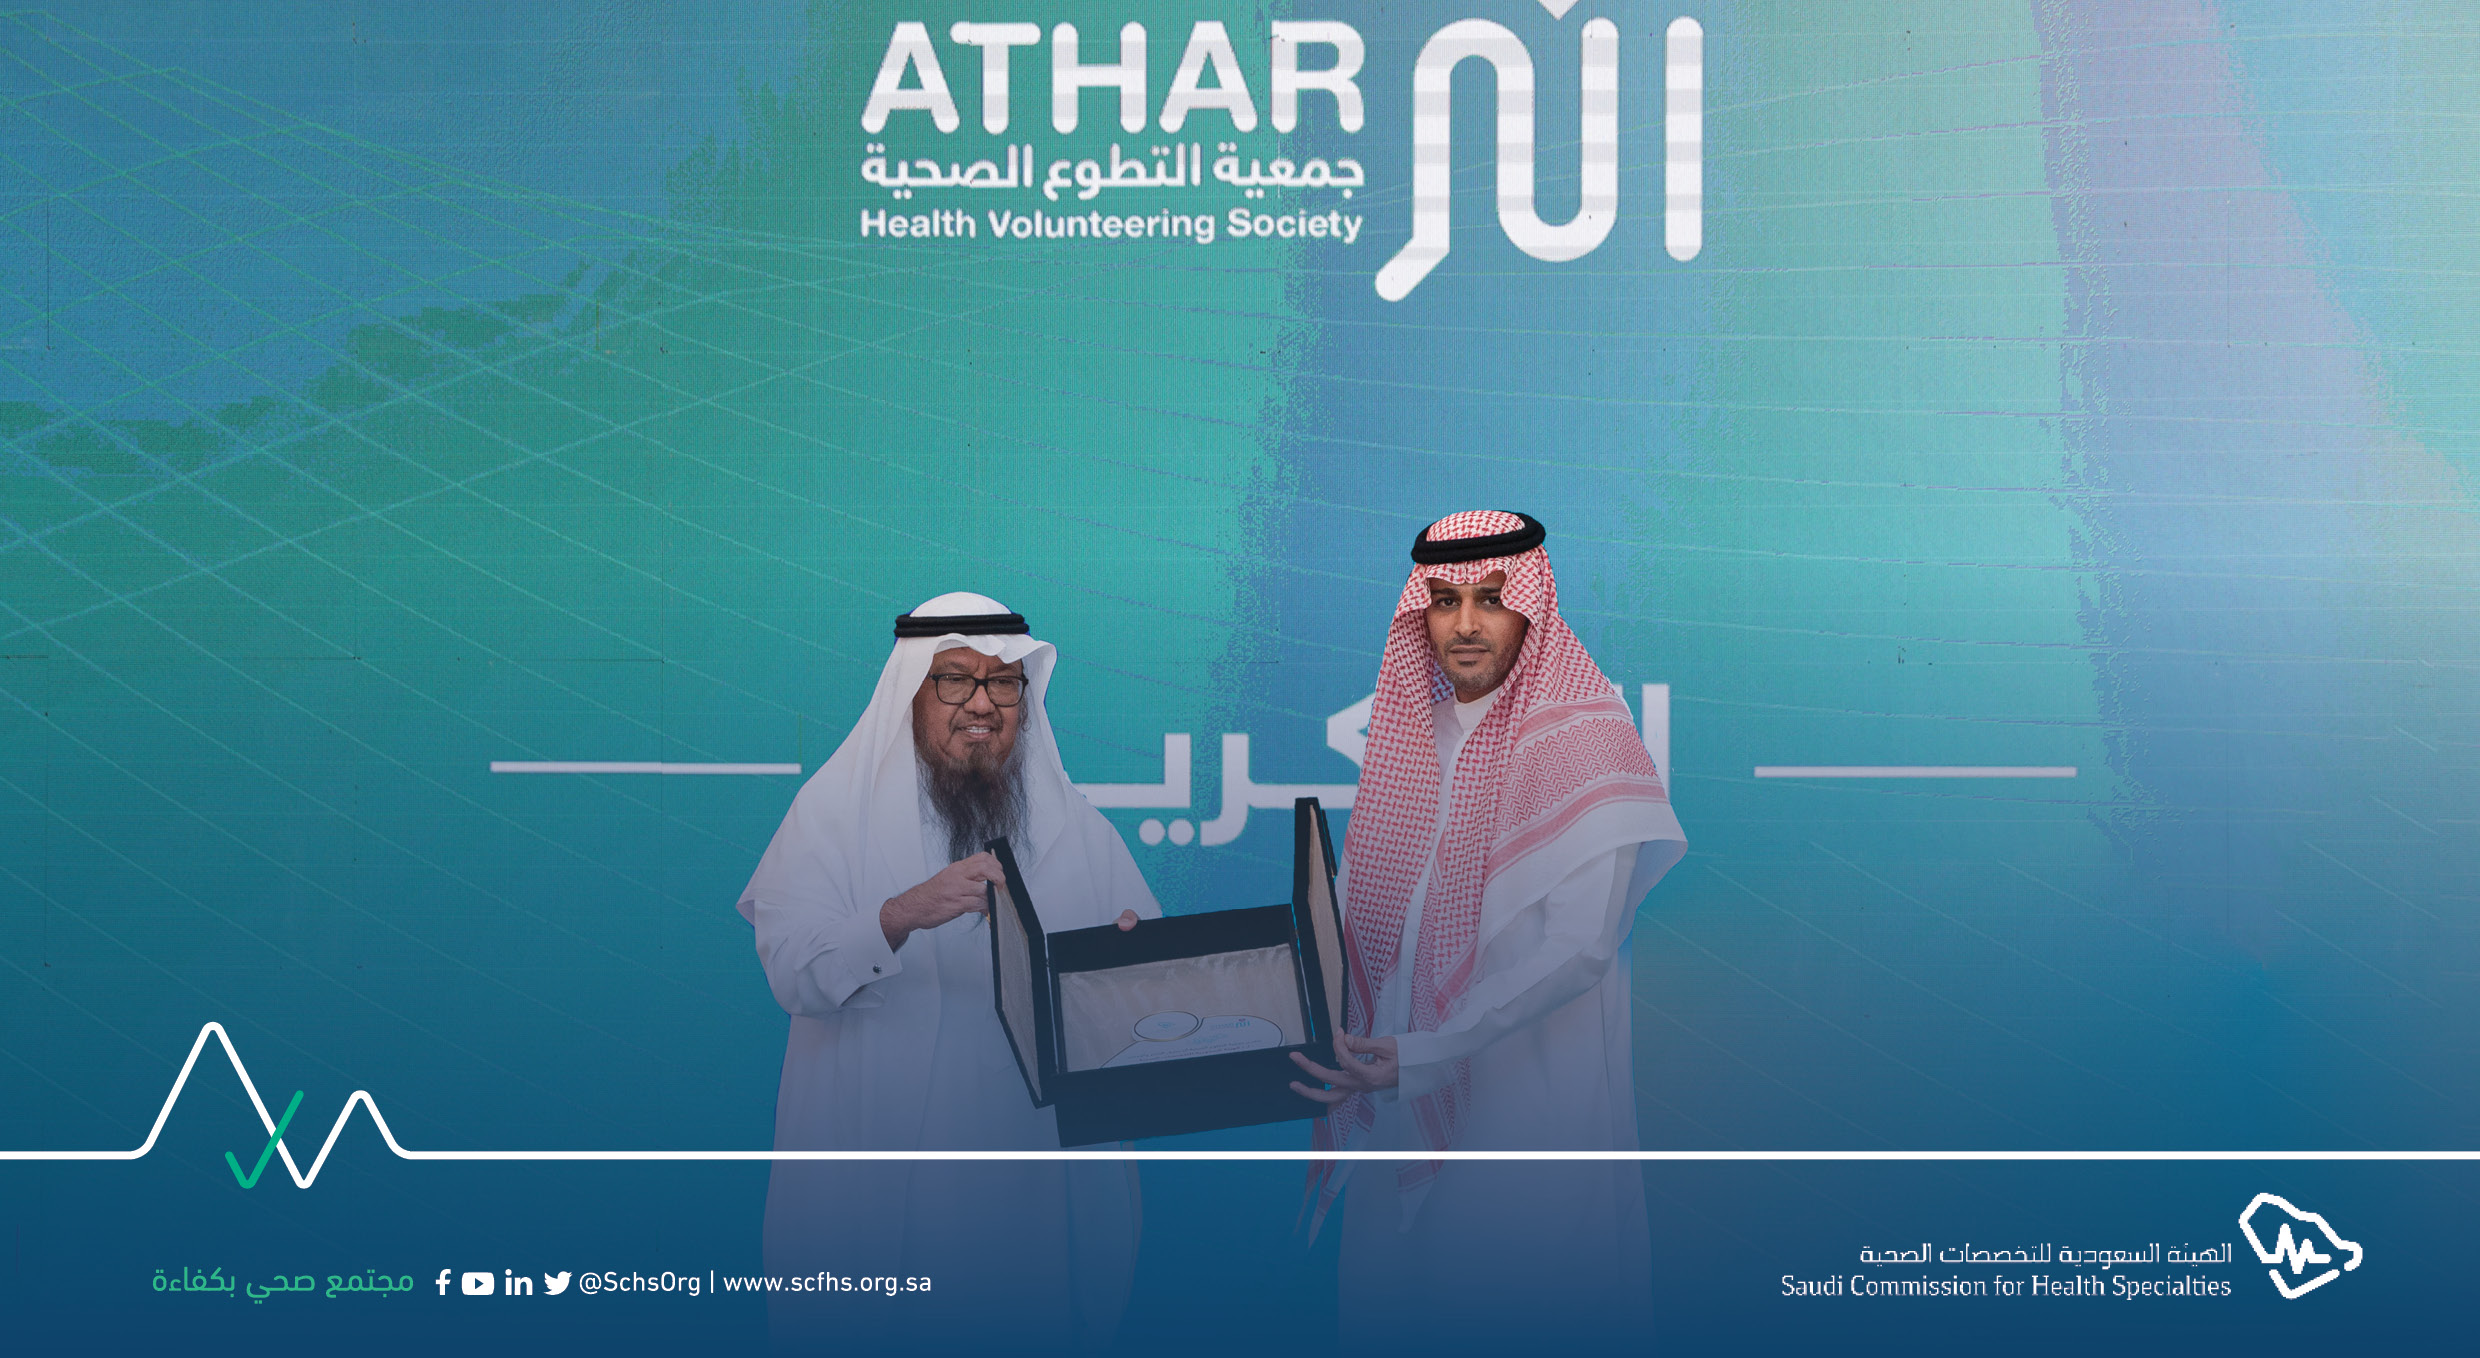 Honoring SCFHS by Health Association Athar 